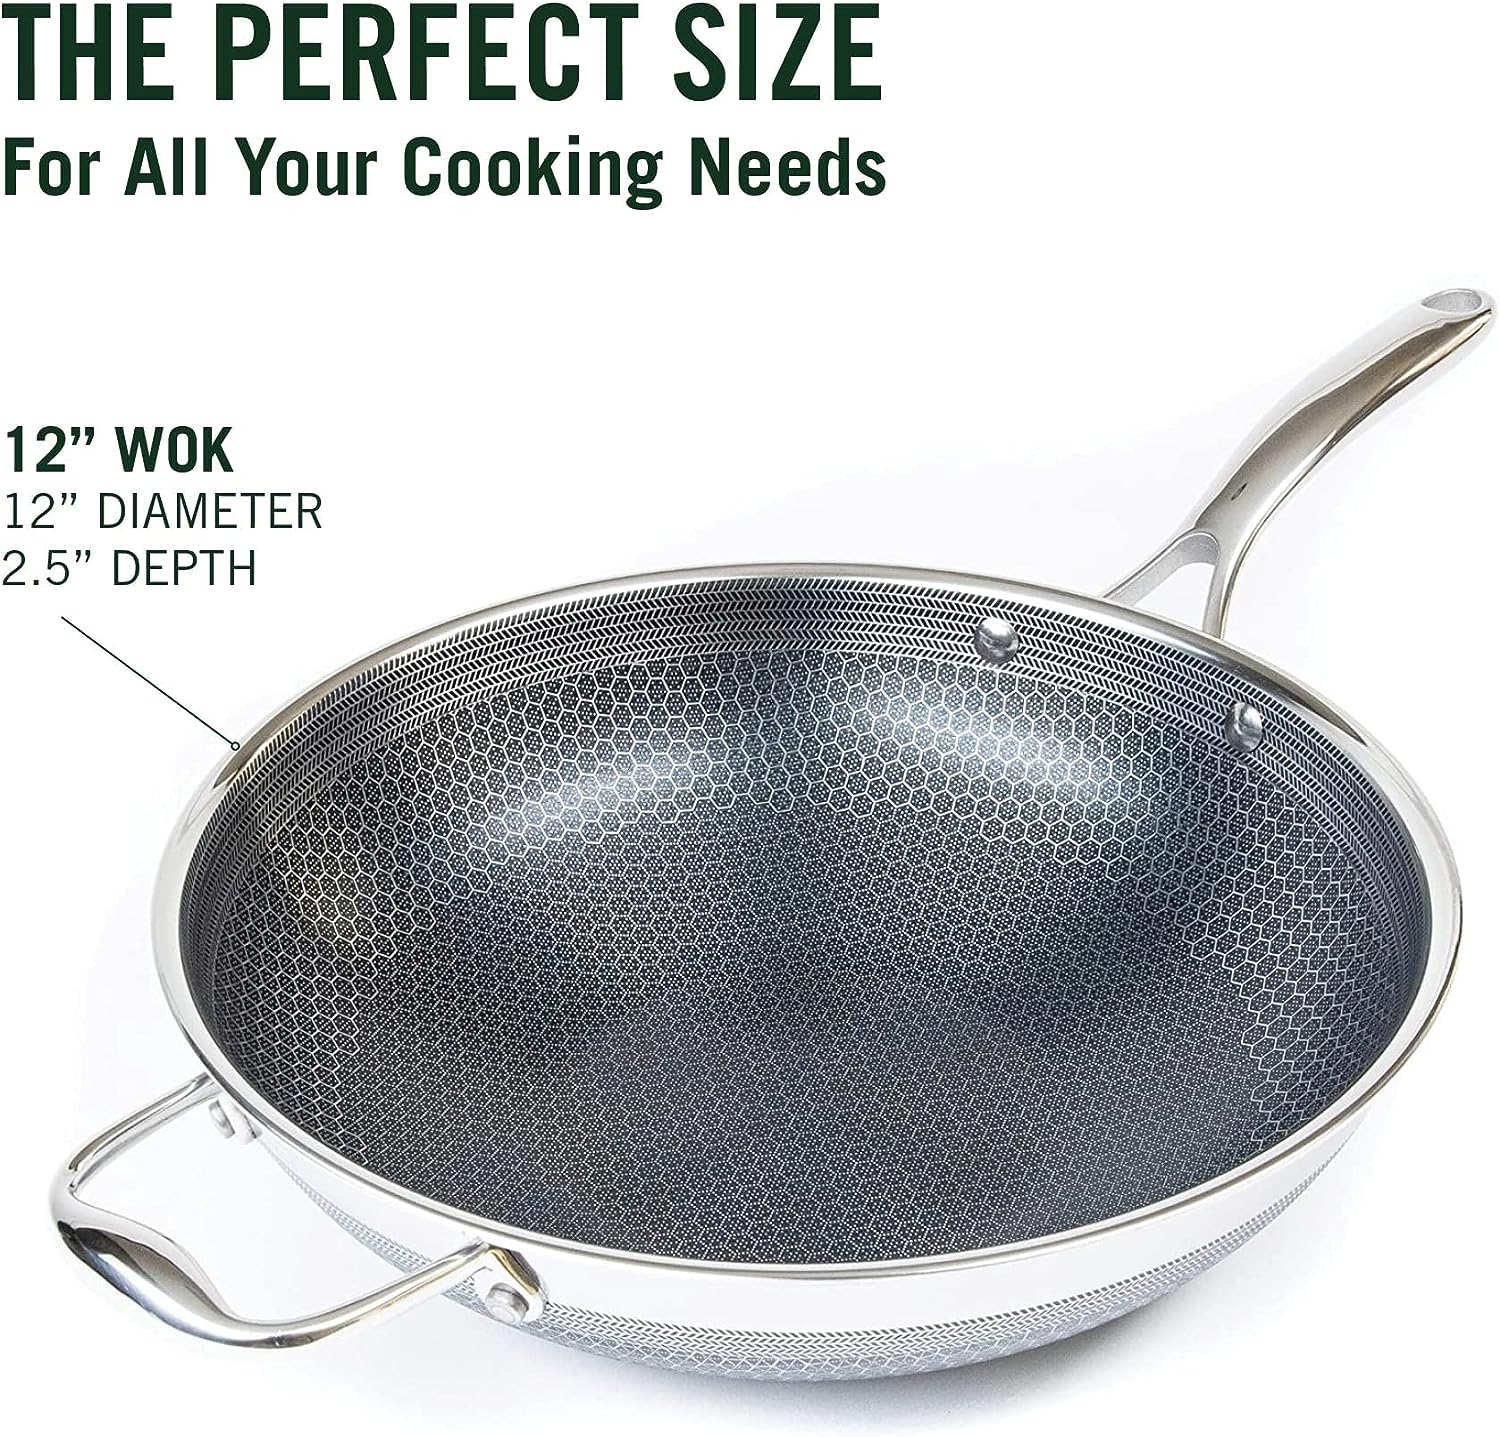 https://bigbigmart.com/wp-content/uploads/2023/09/HexClad-12-Inch-Hybrid-Nonstick-Wok-Dishwasher-and-Oven-Friendly-Compatible-with-All-Cooktops6.jpg